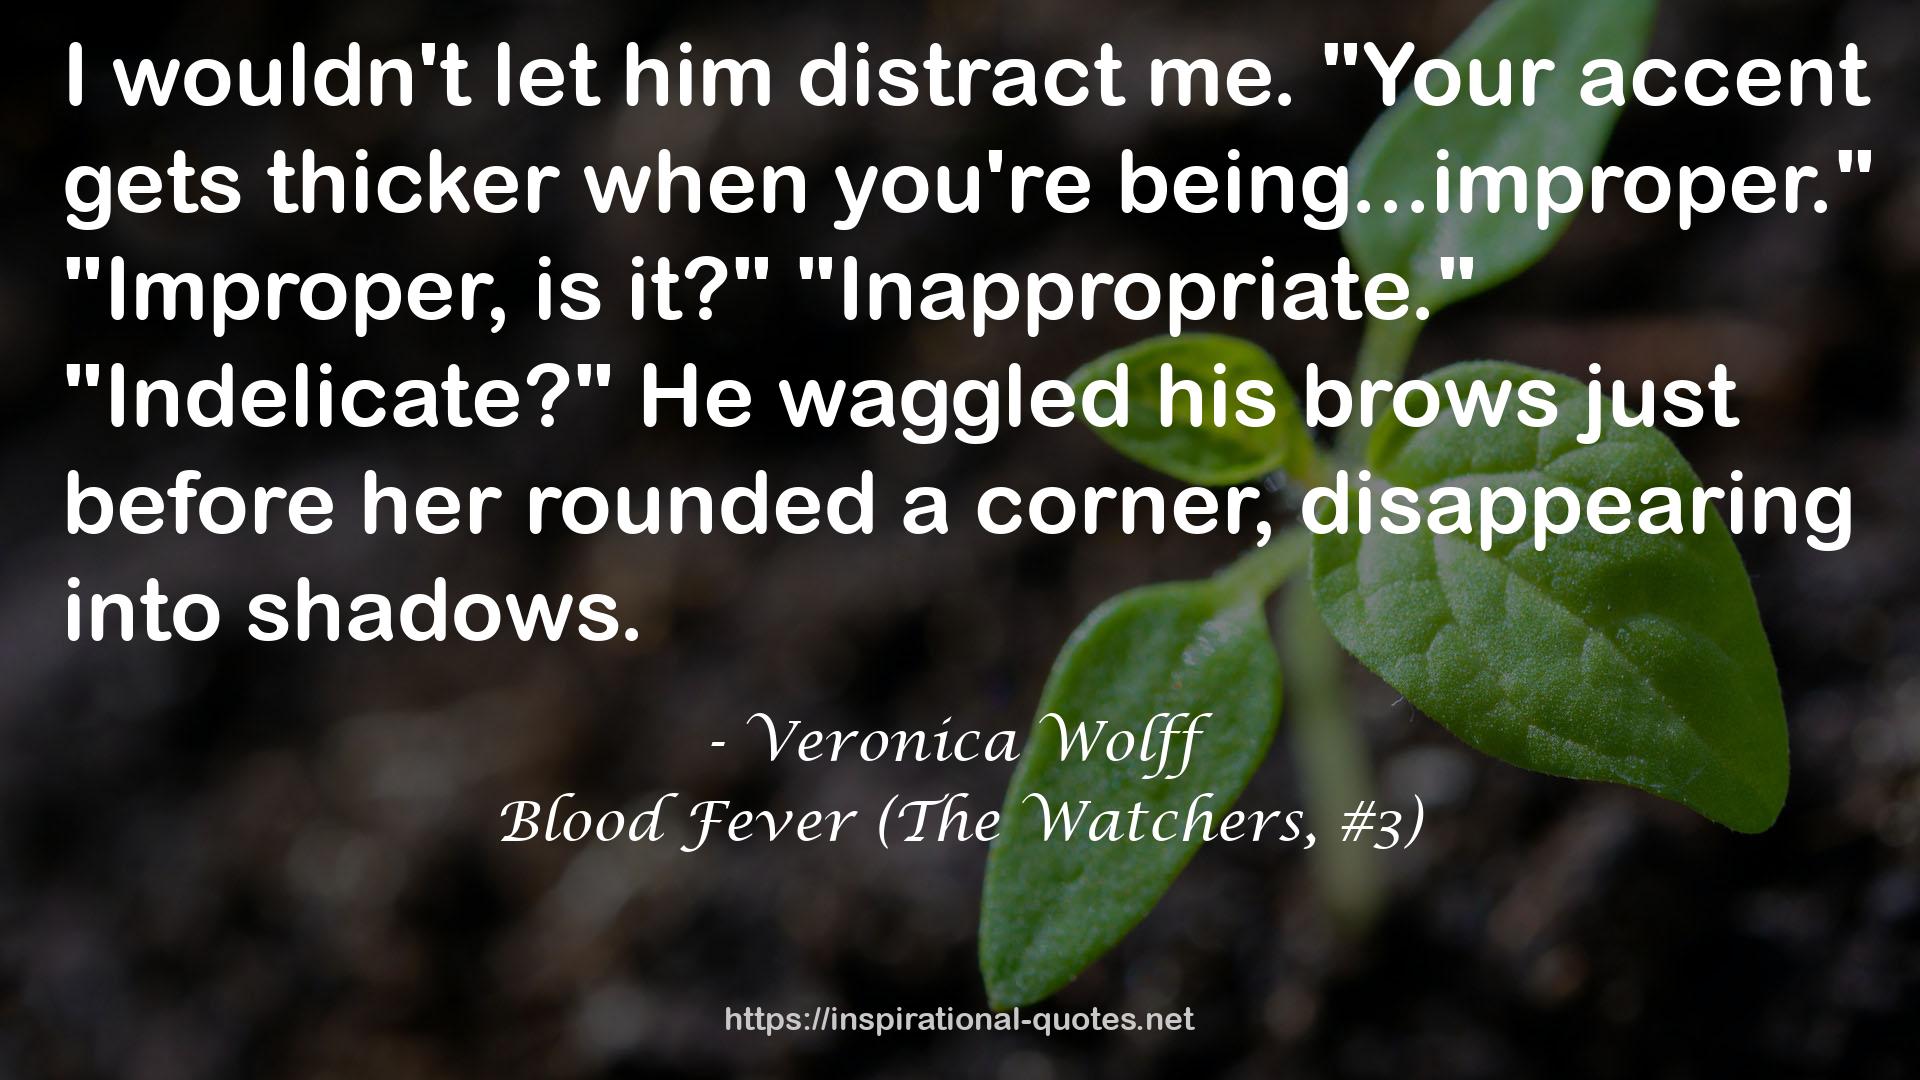 Blood Fever (The Watchers, #3) QUOTES